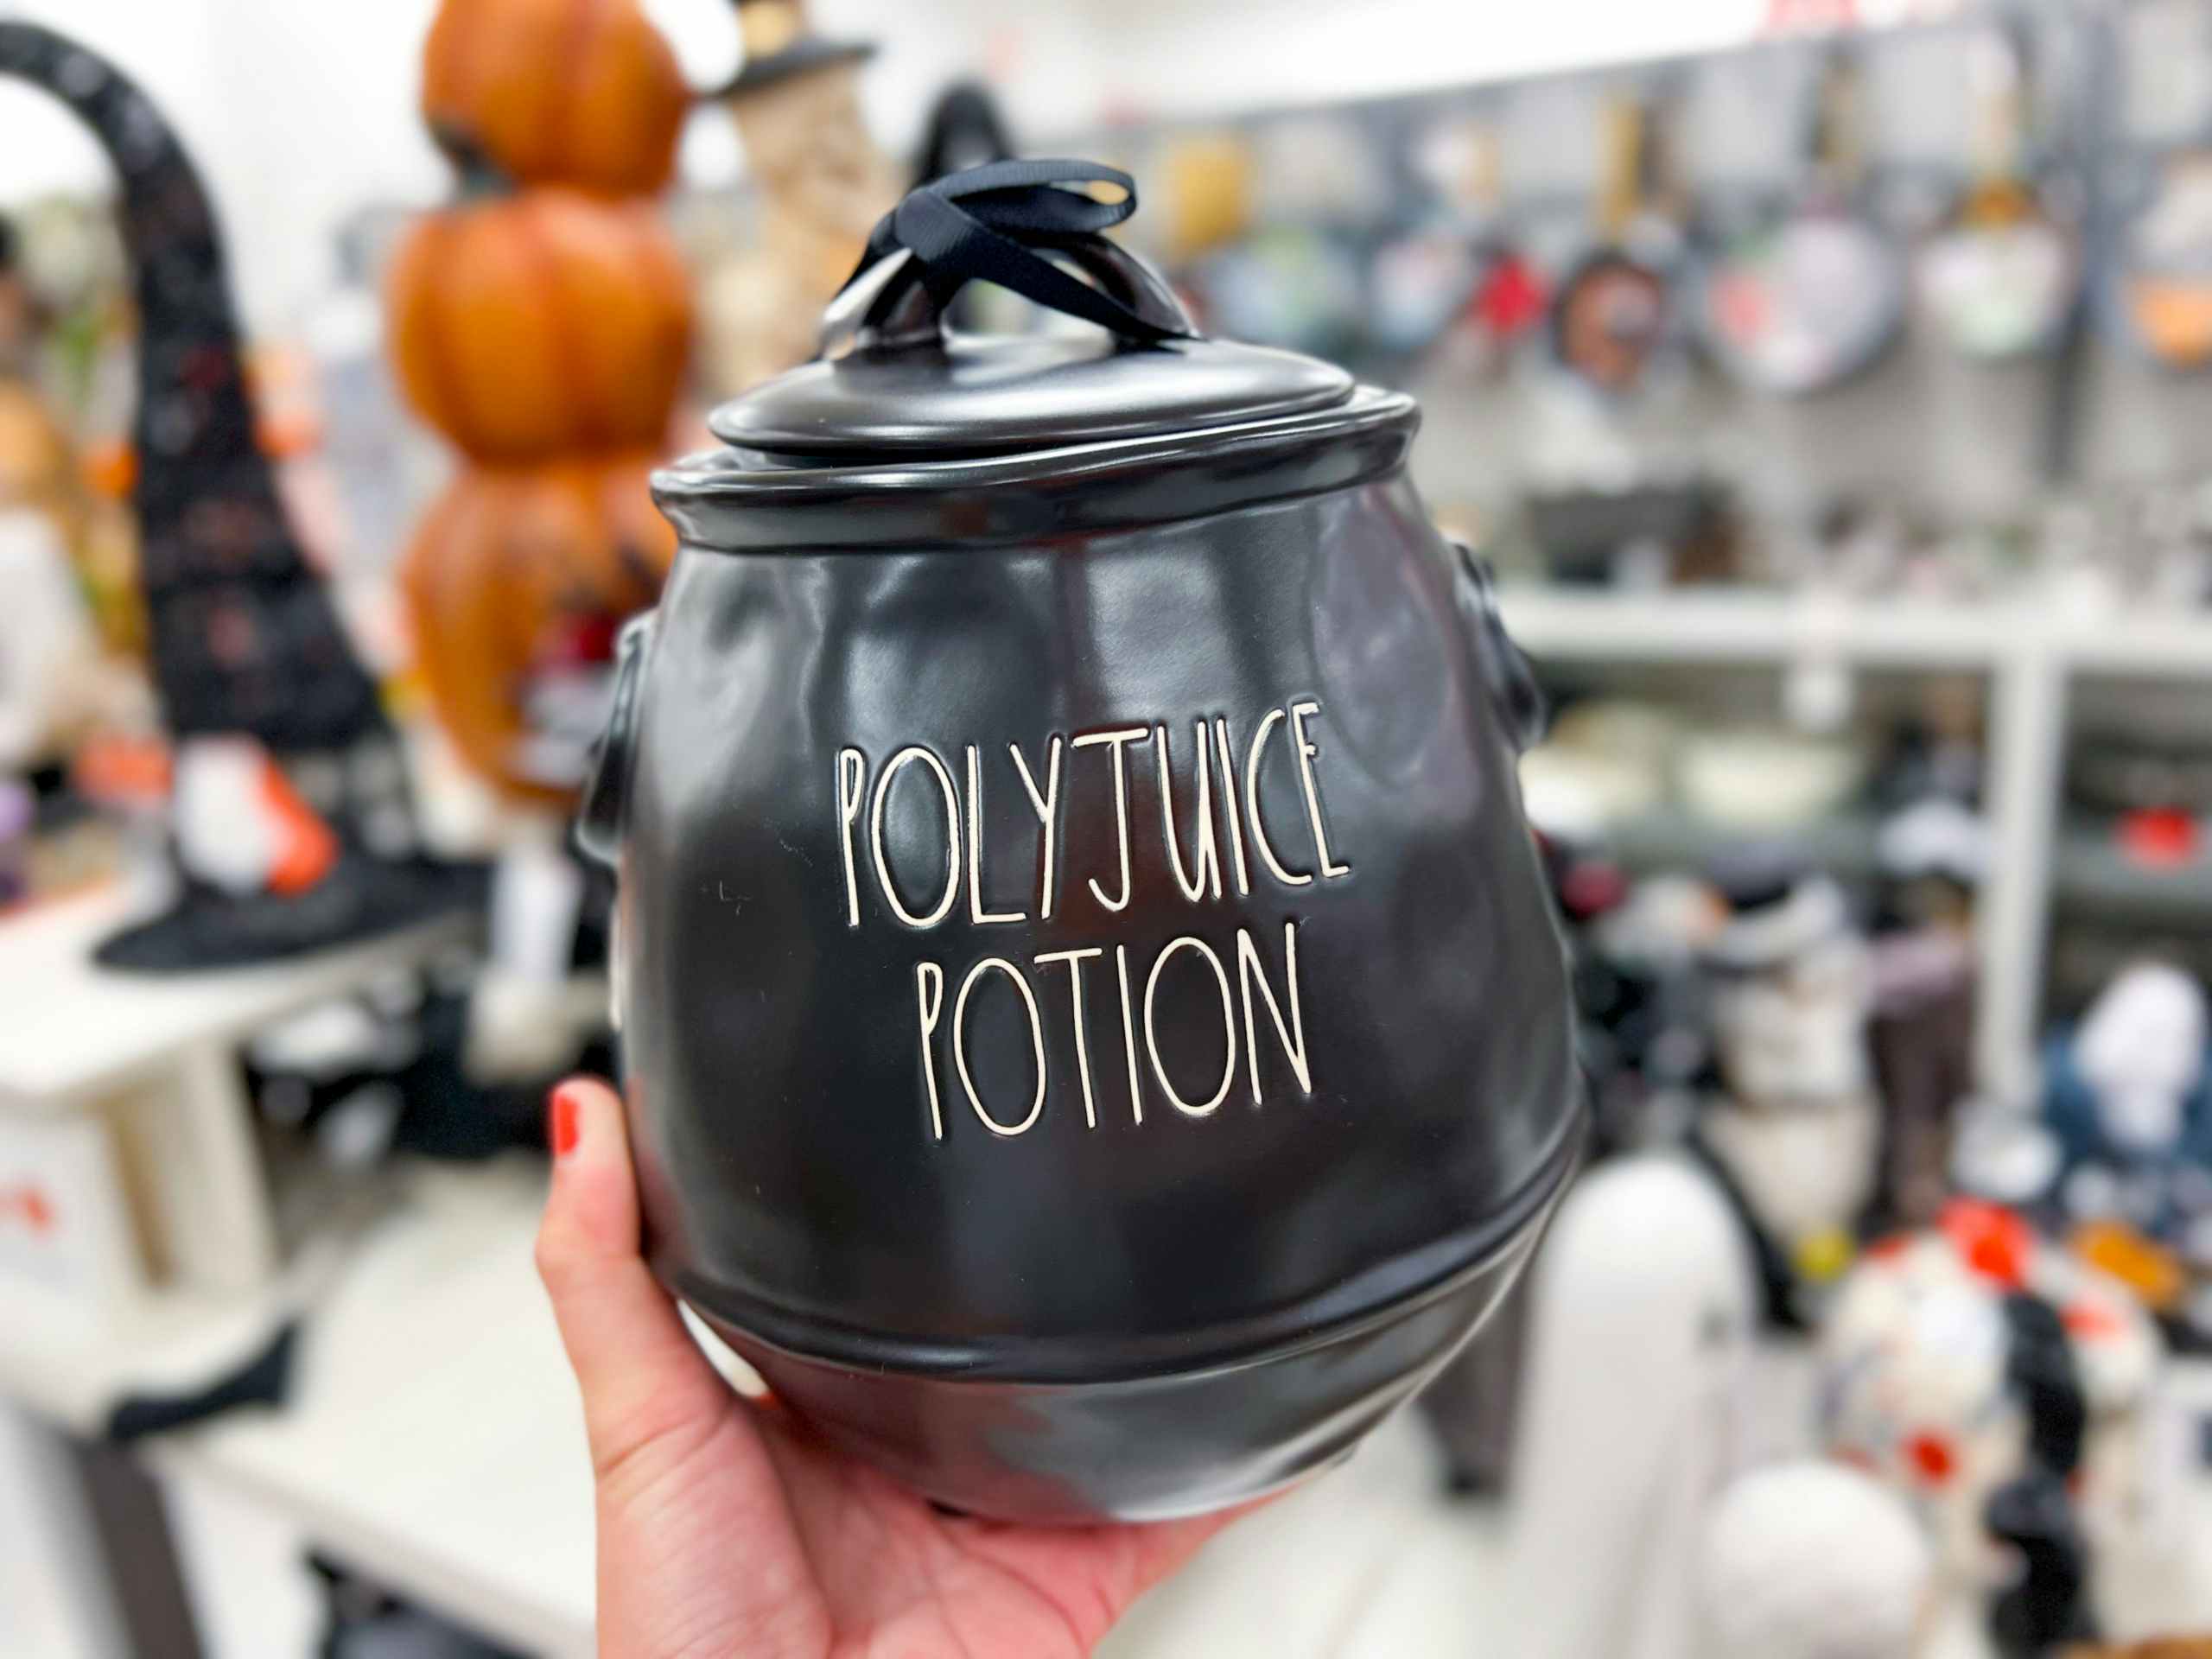 hand holding up a black rae dunn jar that says "polyjuice potion